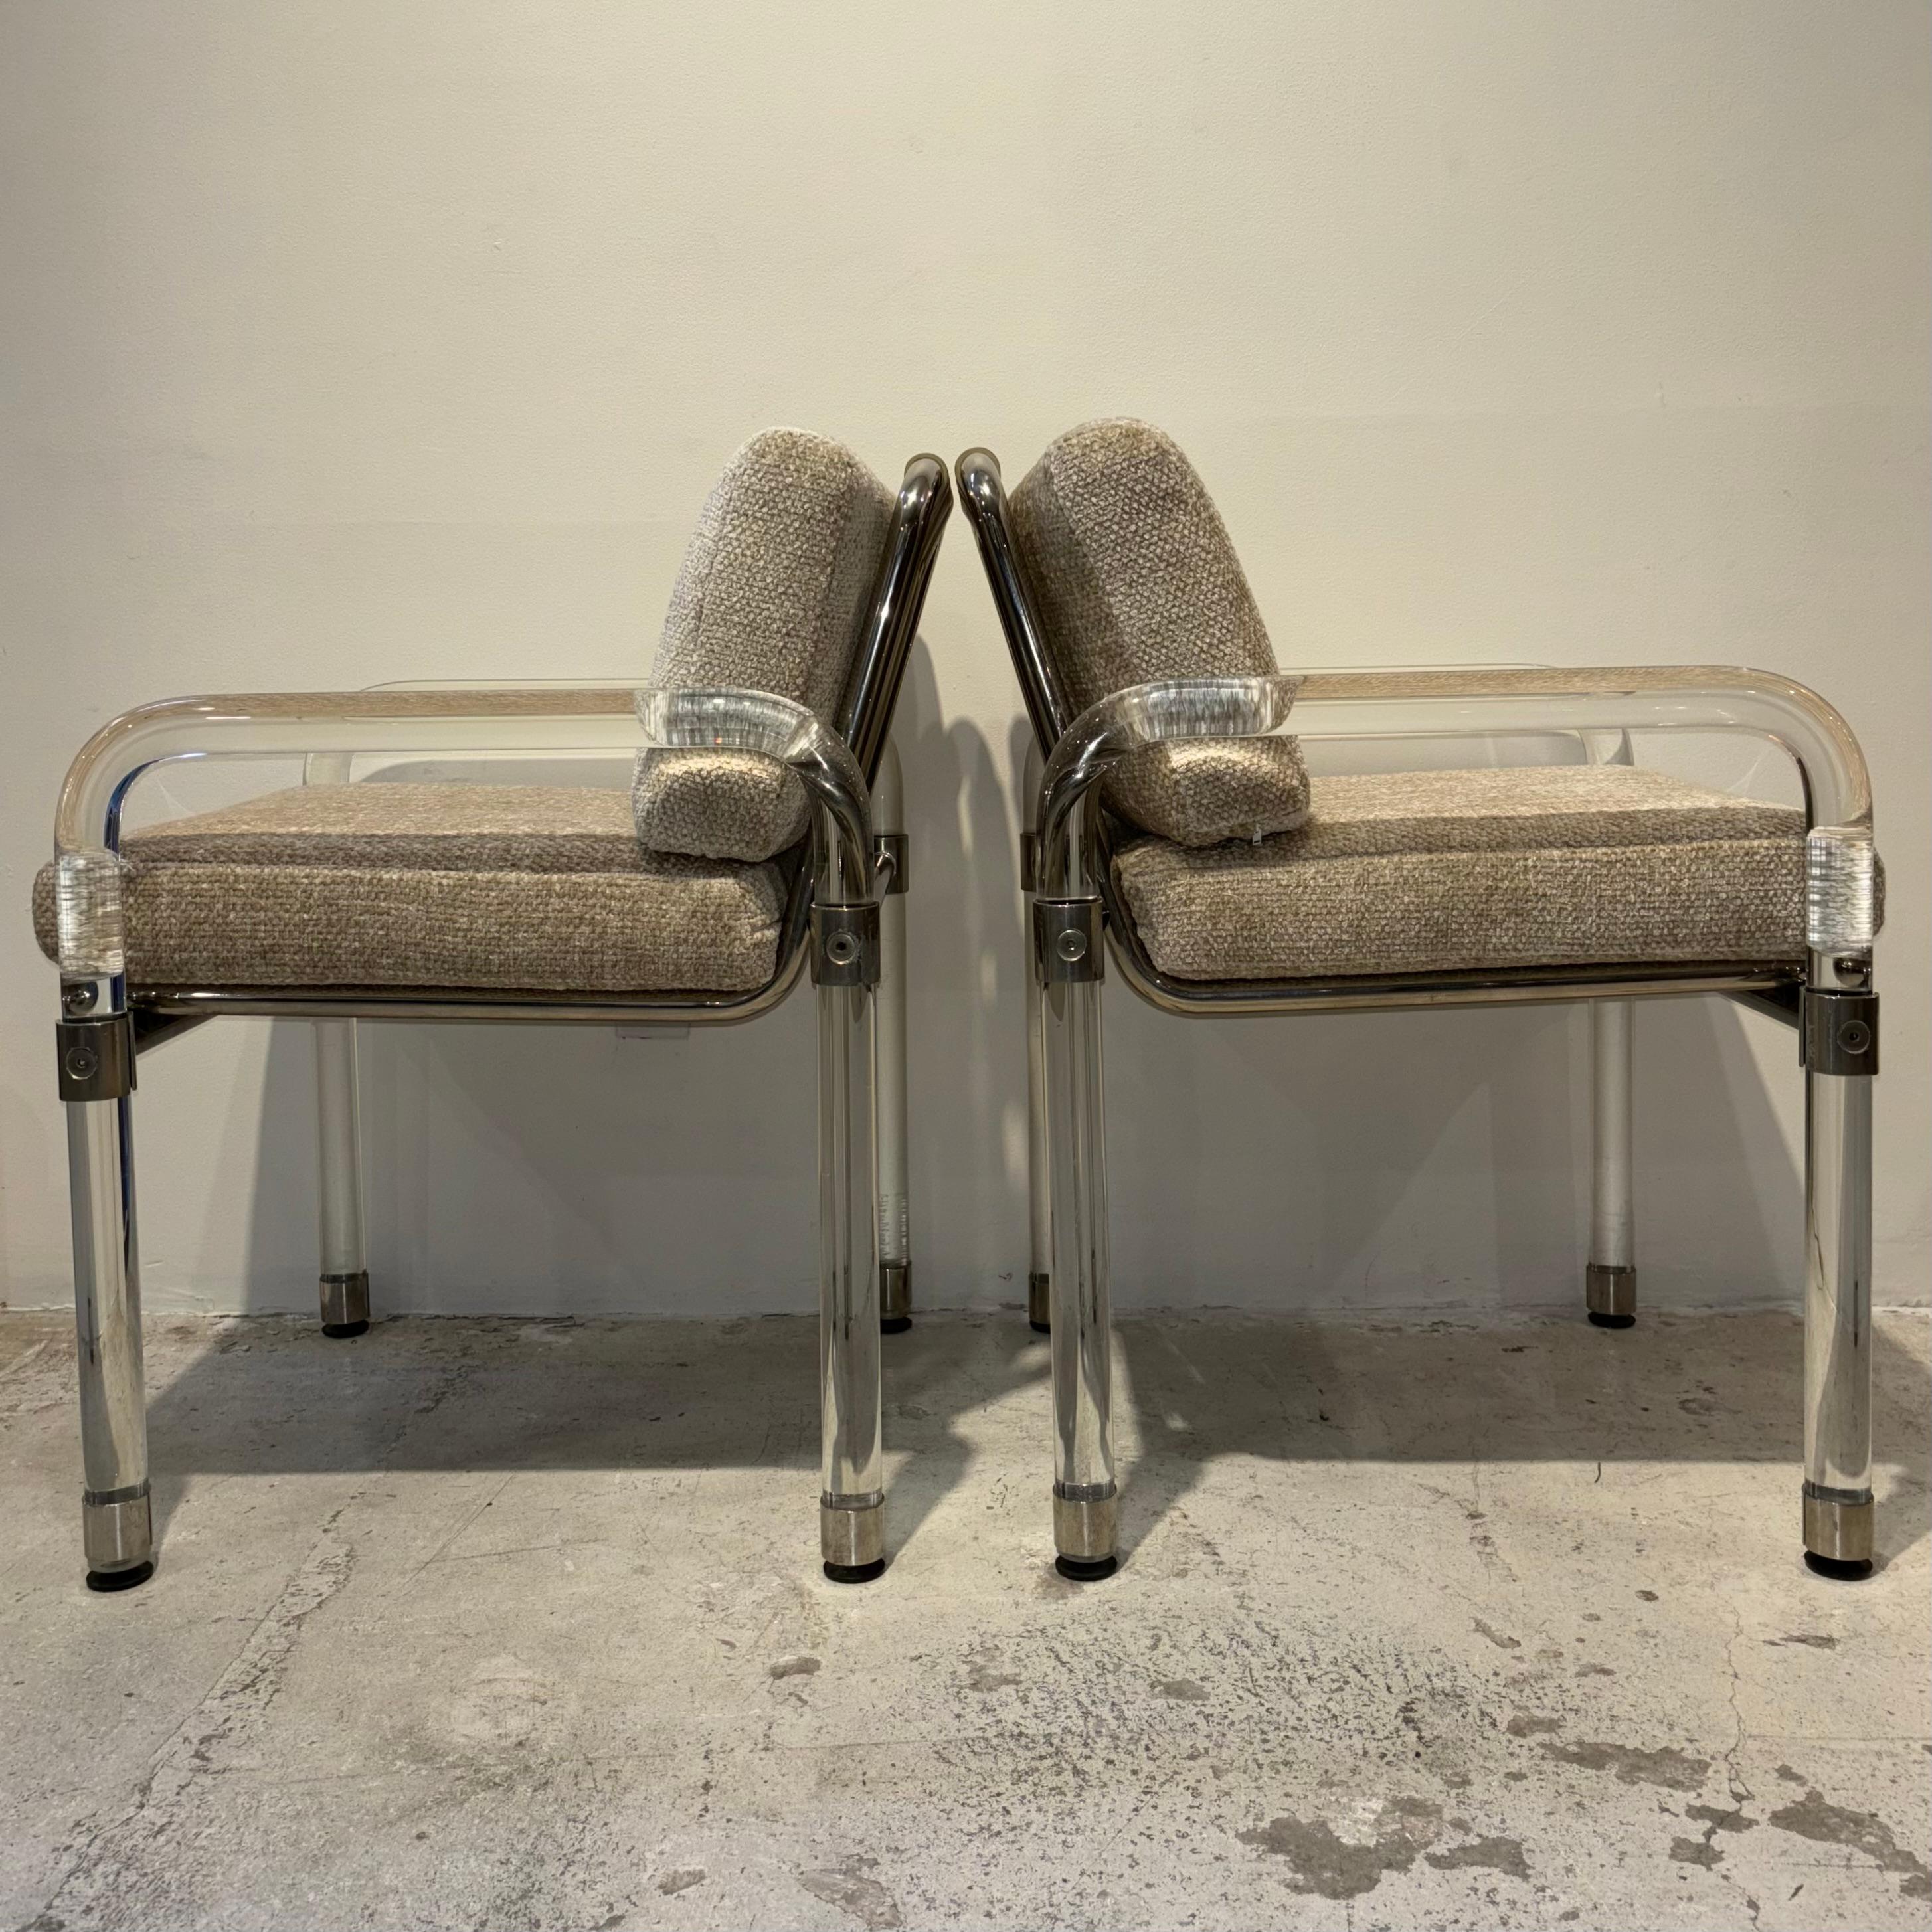 Pair of Lucite & Cream Leather Chairs with Chrome Details by Jeff Messerschmidt

Hand-Signed & Dated 